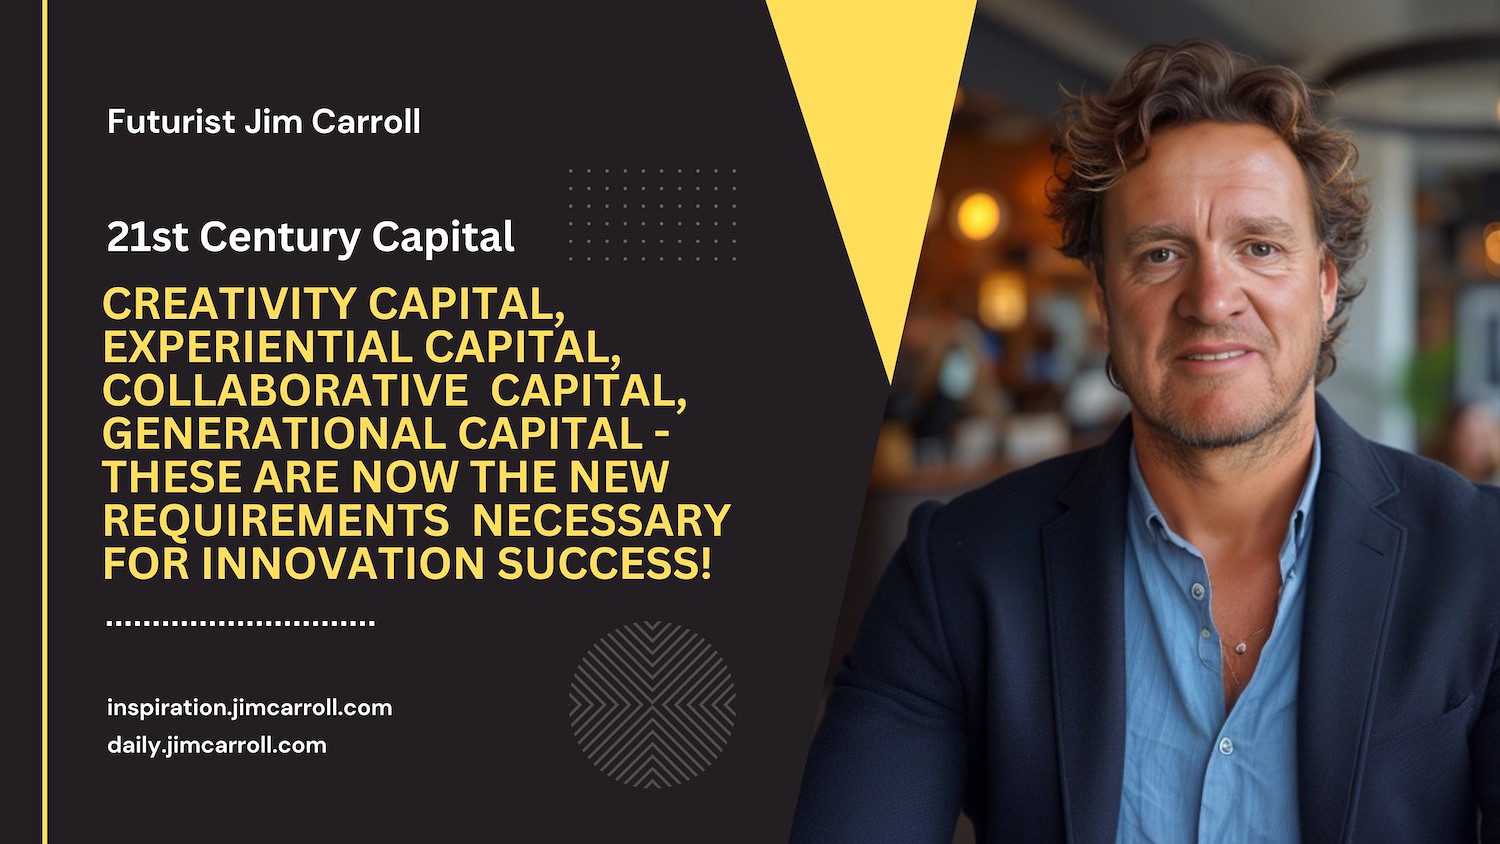 "Creativity capital, experiential capital, collaborative capital, generational capital - these are now the new requirements necessary for innovation success!" - Futurist Jim Carroll